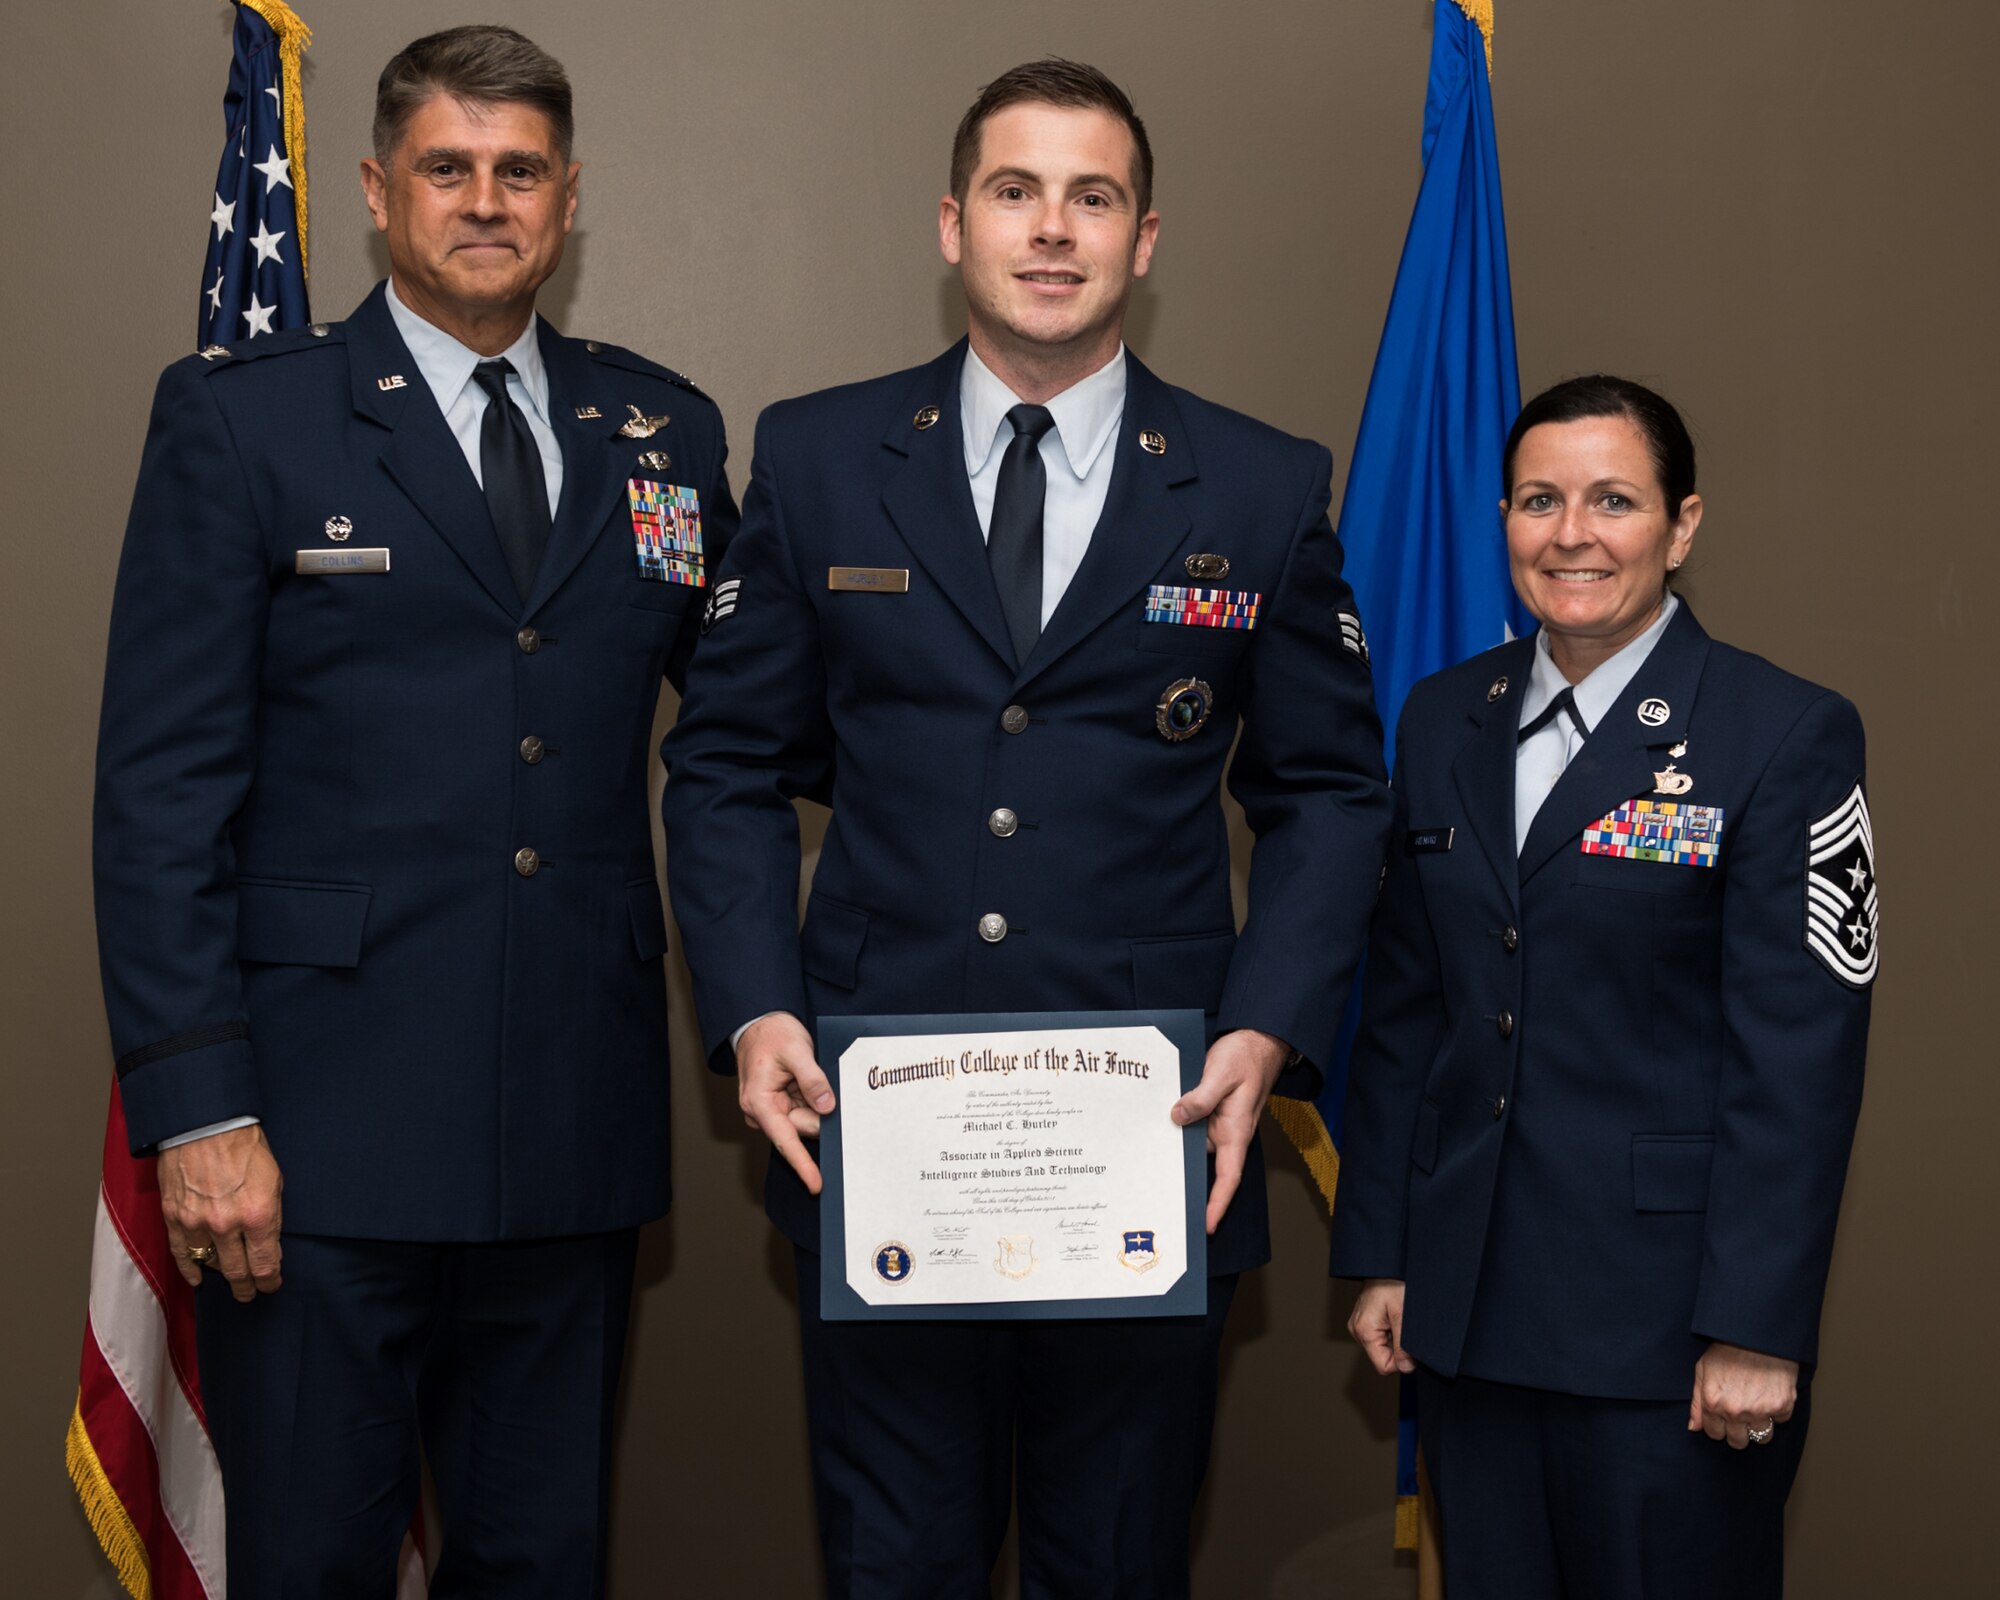 Senior Airmen Michael Hurley, with the 932nd Airlift Wing, receives his Community College of the Air Force associate degree in applied science certificate from 932nd AW commander, Col. Glenn Collins during a CCAF graduation ceremony, June 2, 2019, Scott Air Force Base, Illinois. Wing leadership and fellow Airmen joined the graduates to celebrate their higher education accomplishment. (U.S. Air Force photo by Master Sgt. Christopher Parr)